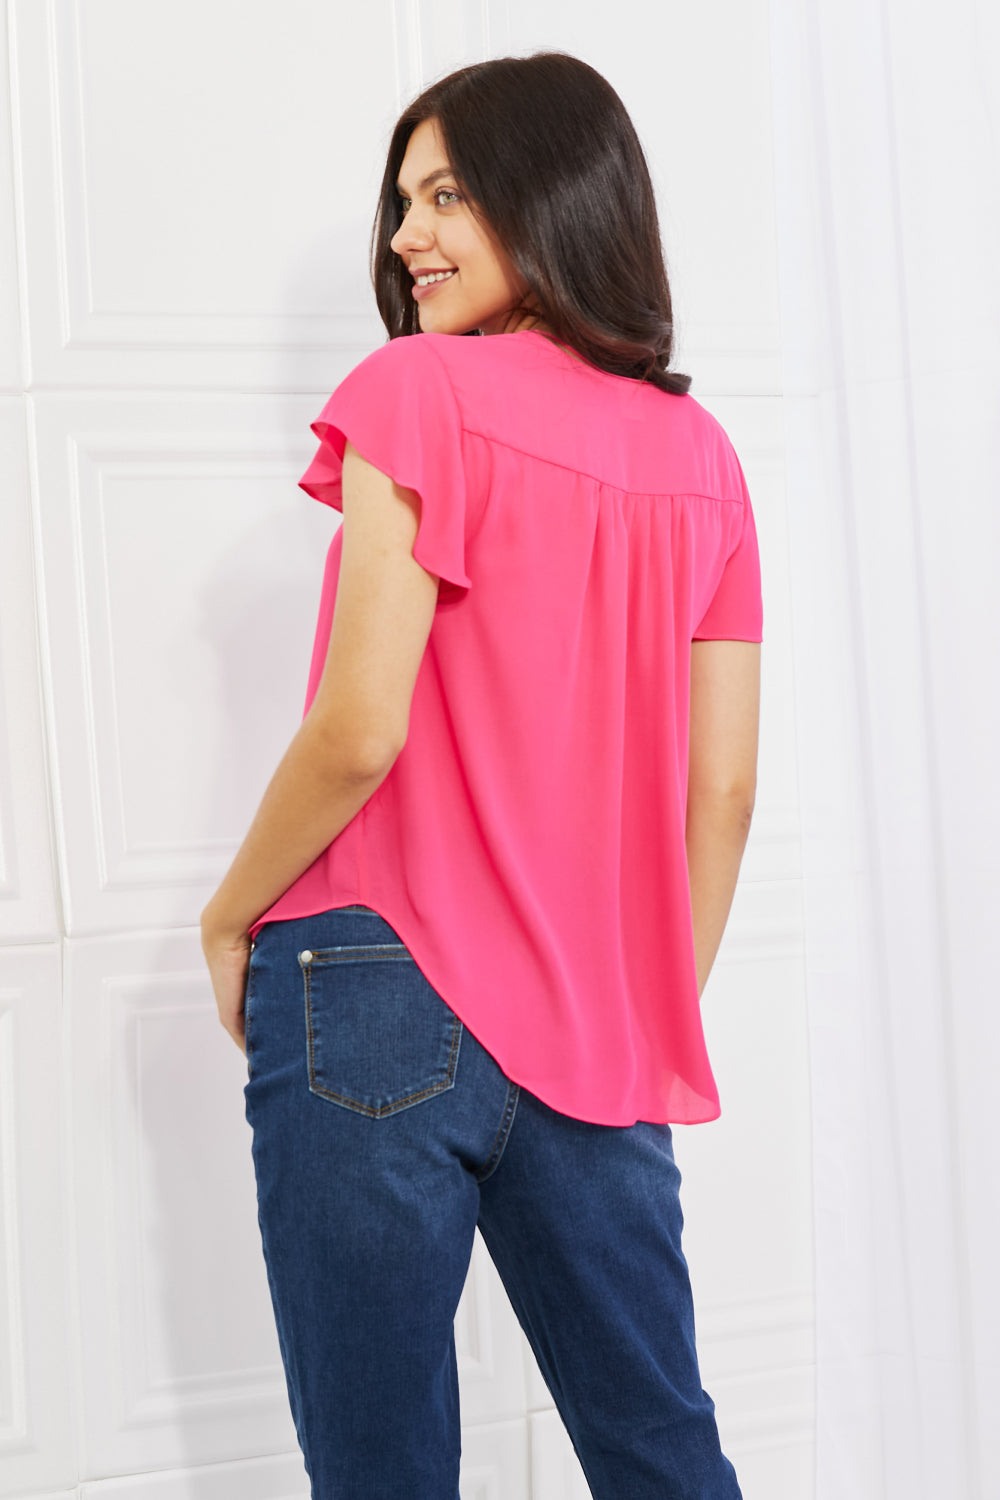 Fall in Love Flutter Sleeve Top in Hot Pink